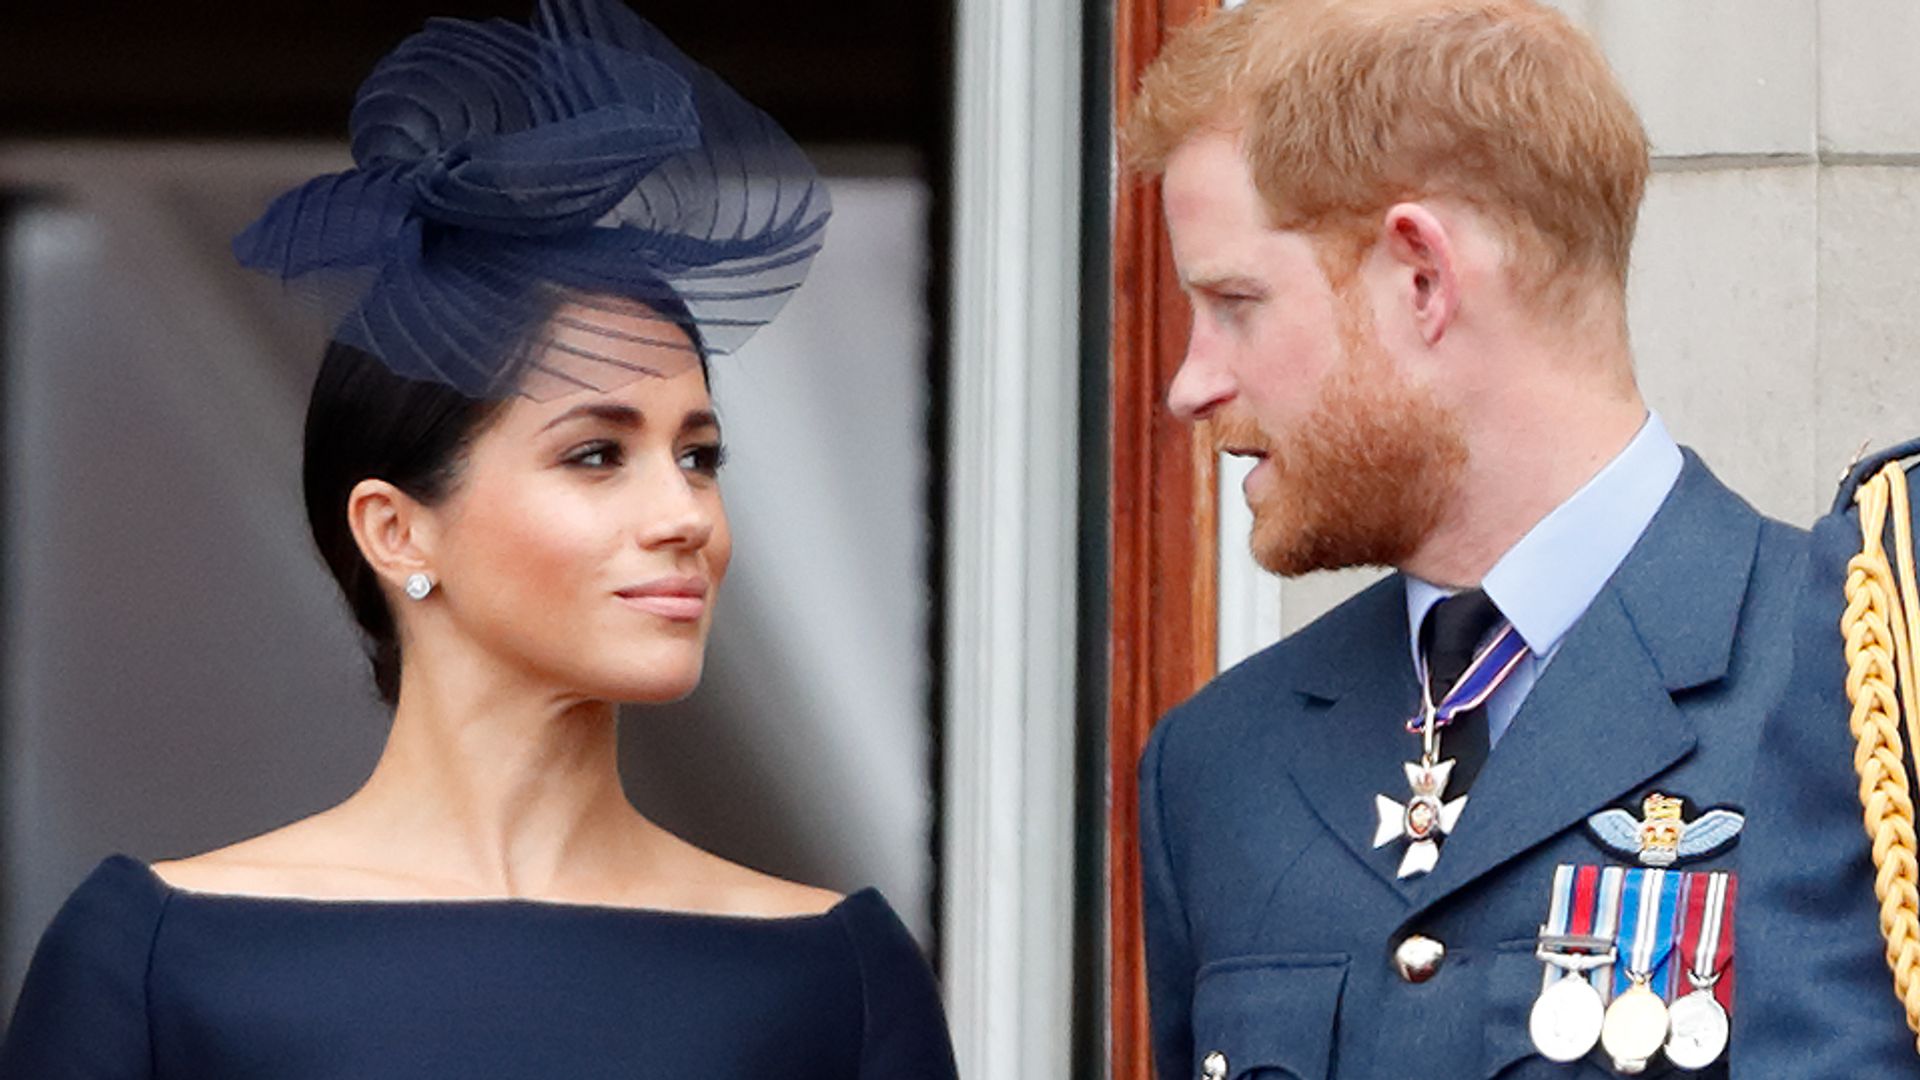 The Duke and Duchess of Sussex looking at each other on the balcony of Buckingham Palace on July 10, 2018